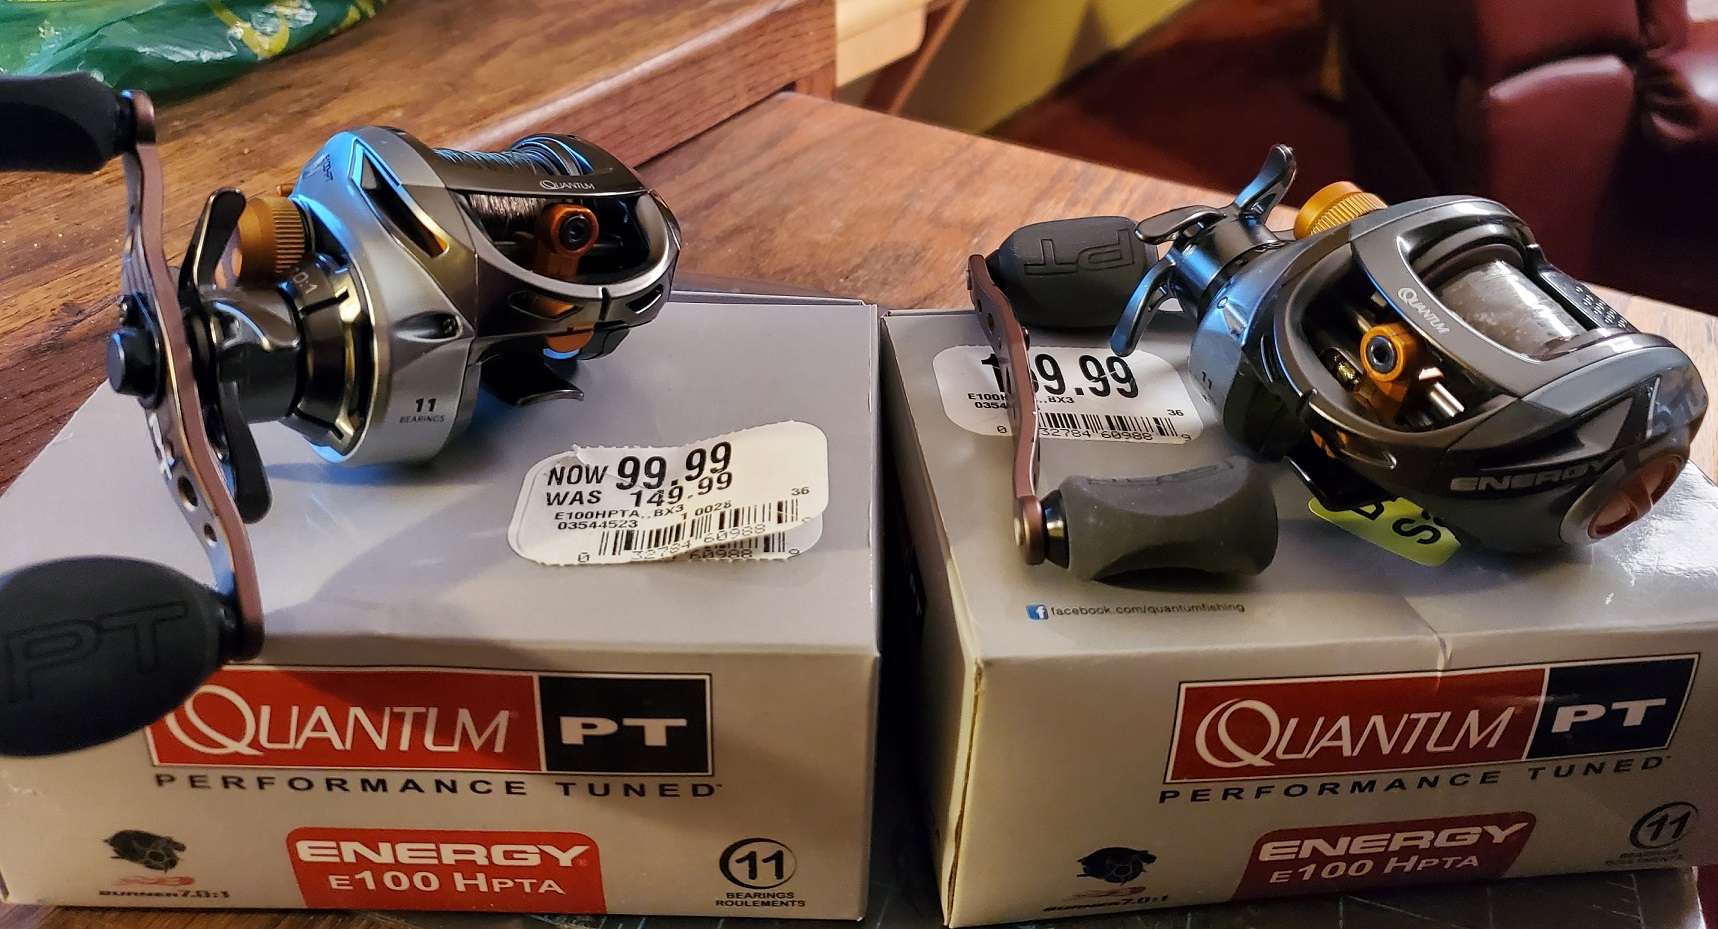 2006 Quantum Energy PT Casting And Spinning Reels - Take Me Back In Time  - Fishing Rods, Reels, Line, and Knots - Bass Fishing Forums